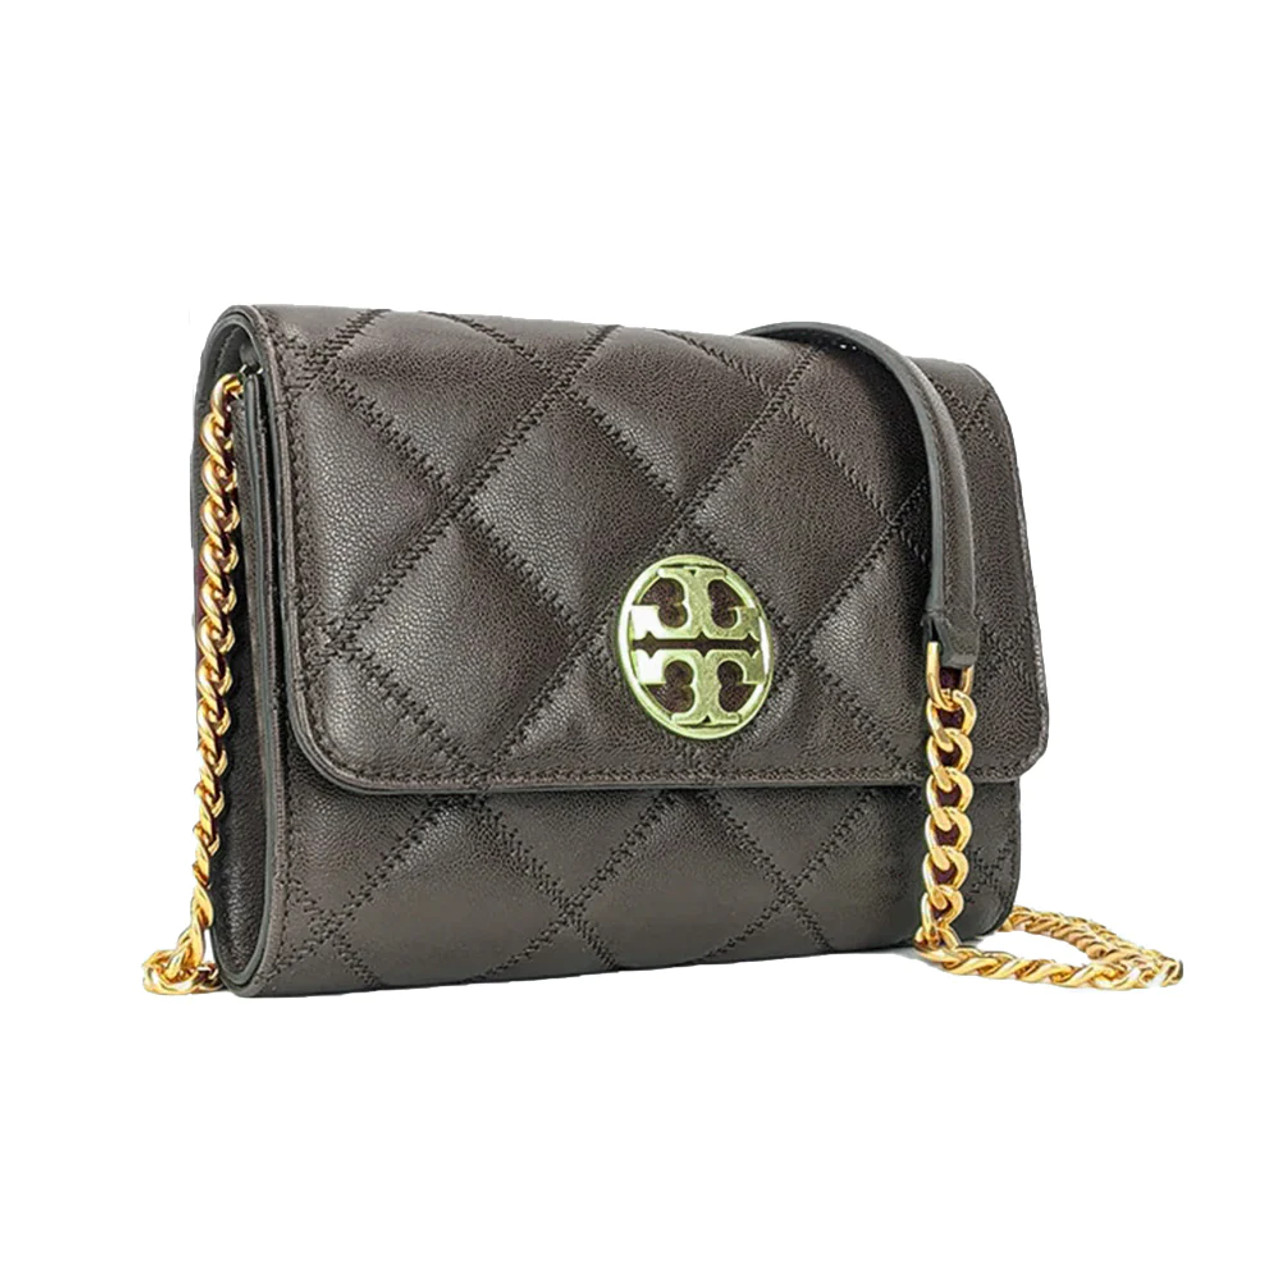 Tory Burch, Bags, Tory Burch Lily Chain Wallet